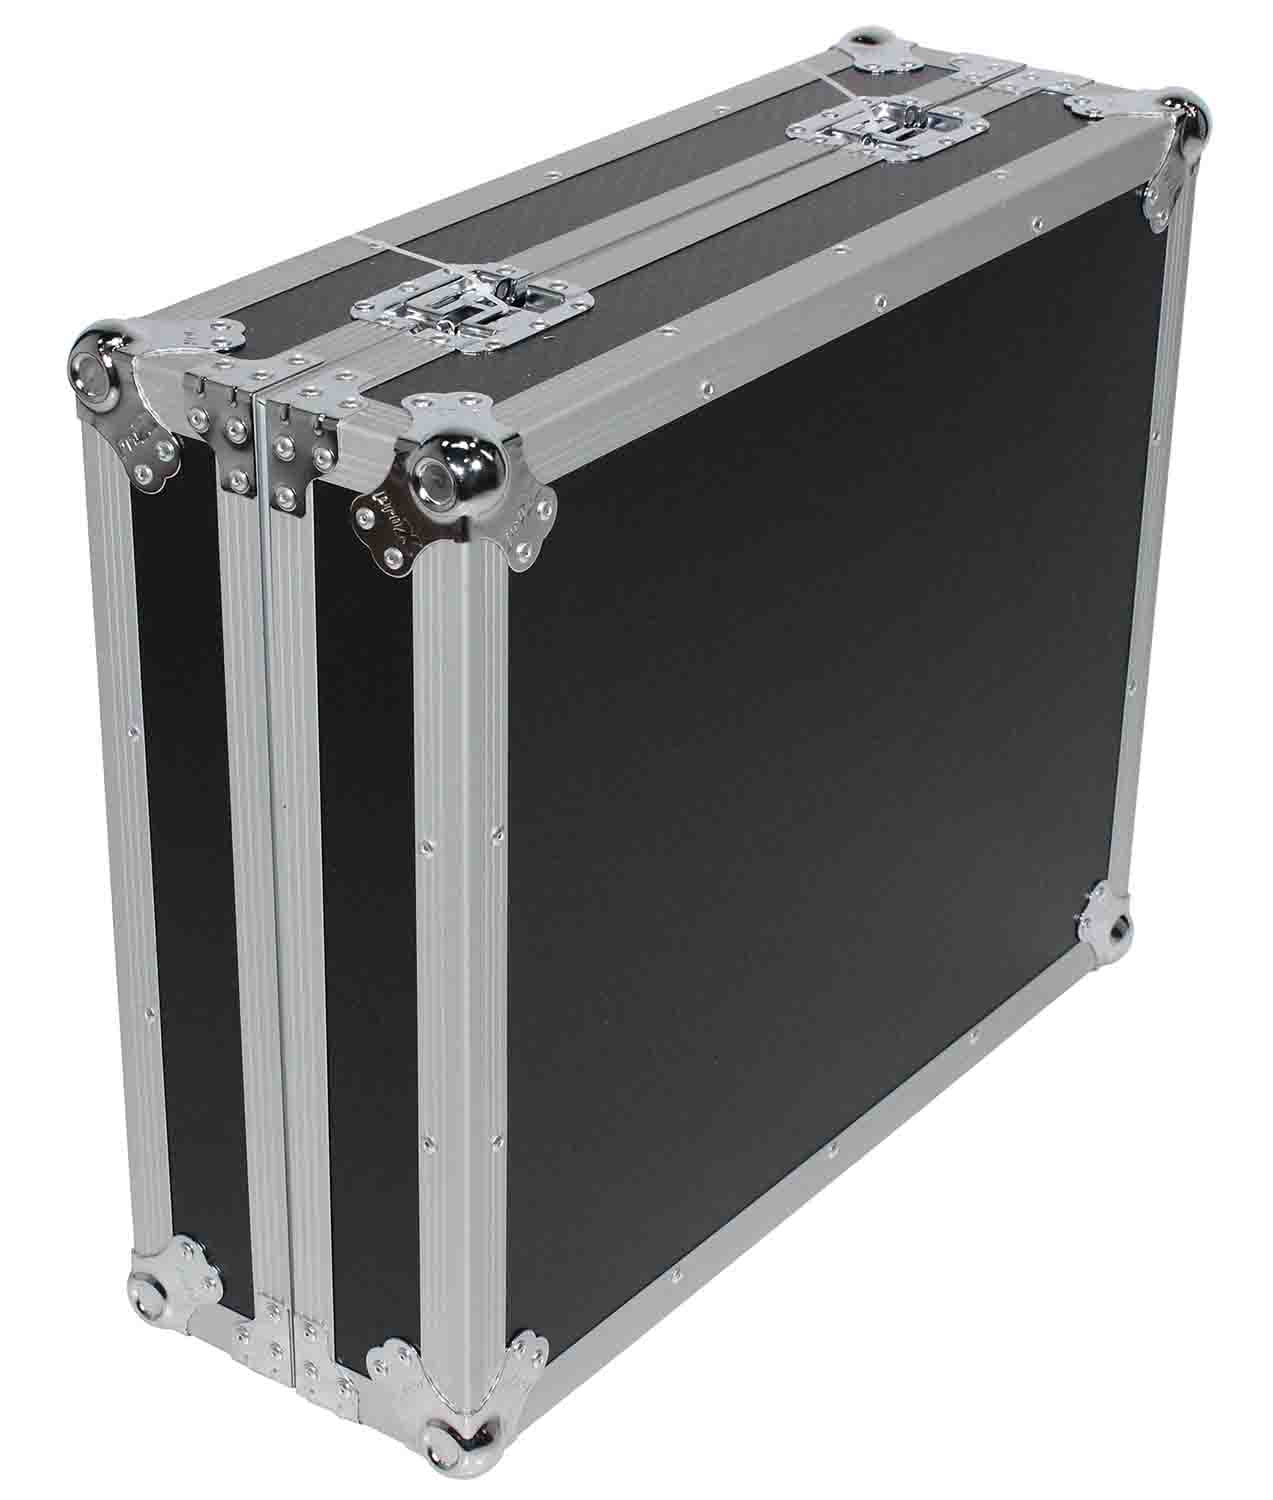 ProX XS-18R18W 18U Space Amp Rack Mount ATA Flight Case with Casters - 18 Inch - Hollywood DJ